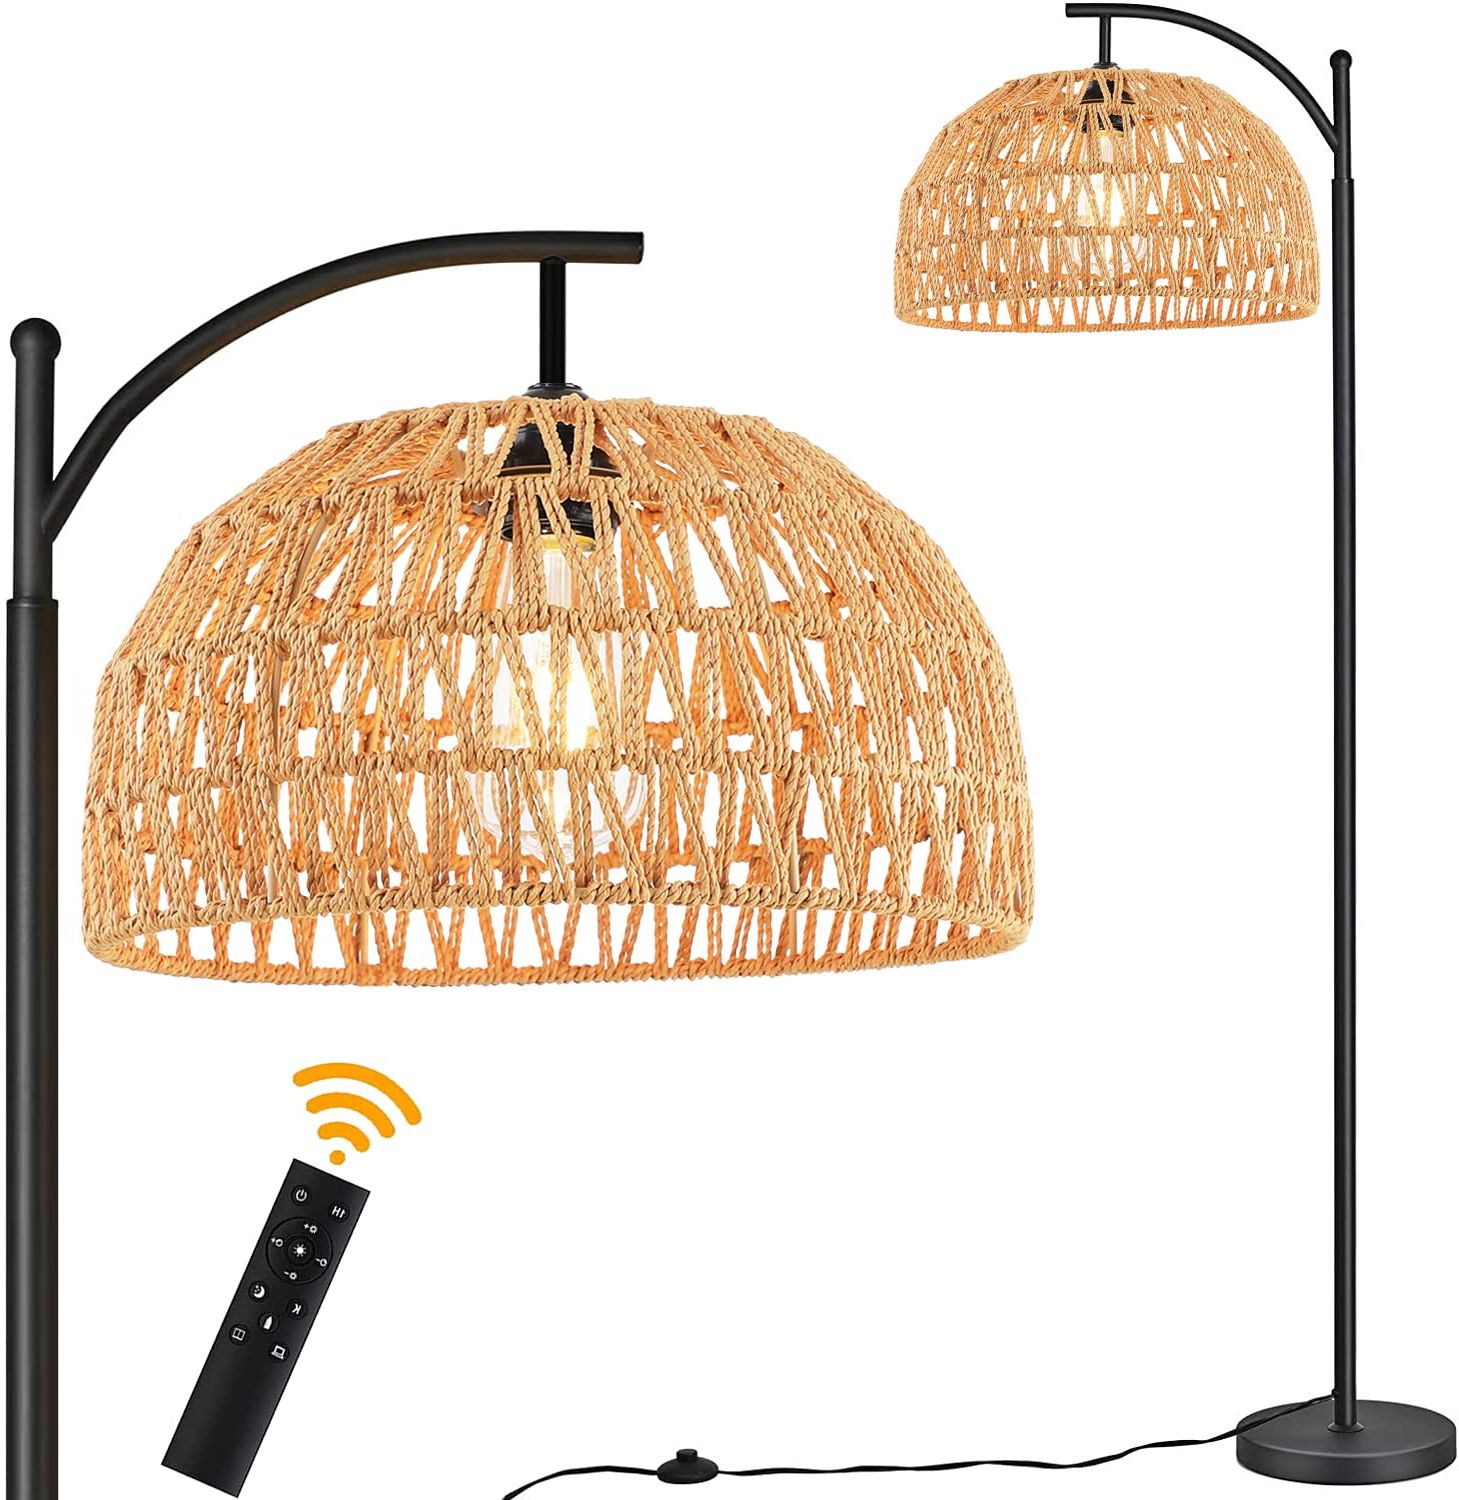 Current Rattan Standing Lamps Pertaining To Qiyizm Rattan Floor Lamp For Living Room,bedroom,farmhouse,boho Dimmable Standing  Lamp With Control,wicker Hand Worked Bamboo Lamp Shade,black Industrial  Modern Floor Light Adjustable Rustic Tall Lamp – – Amazon (View 1 of 10)